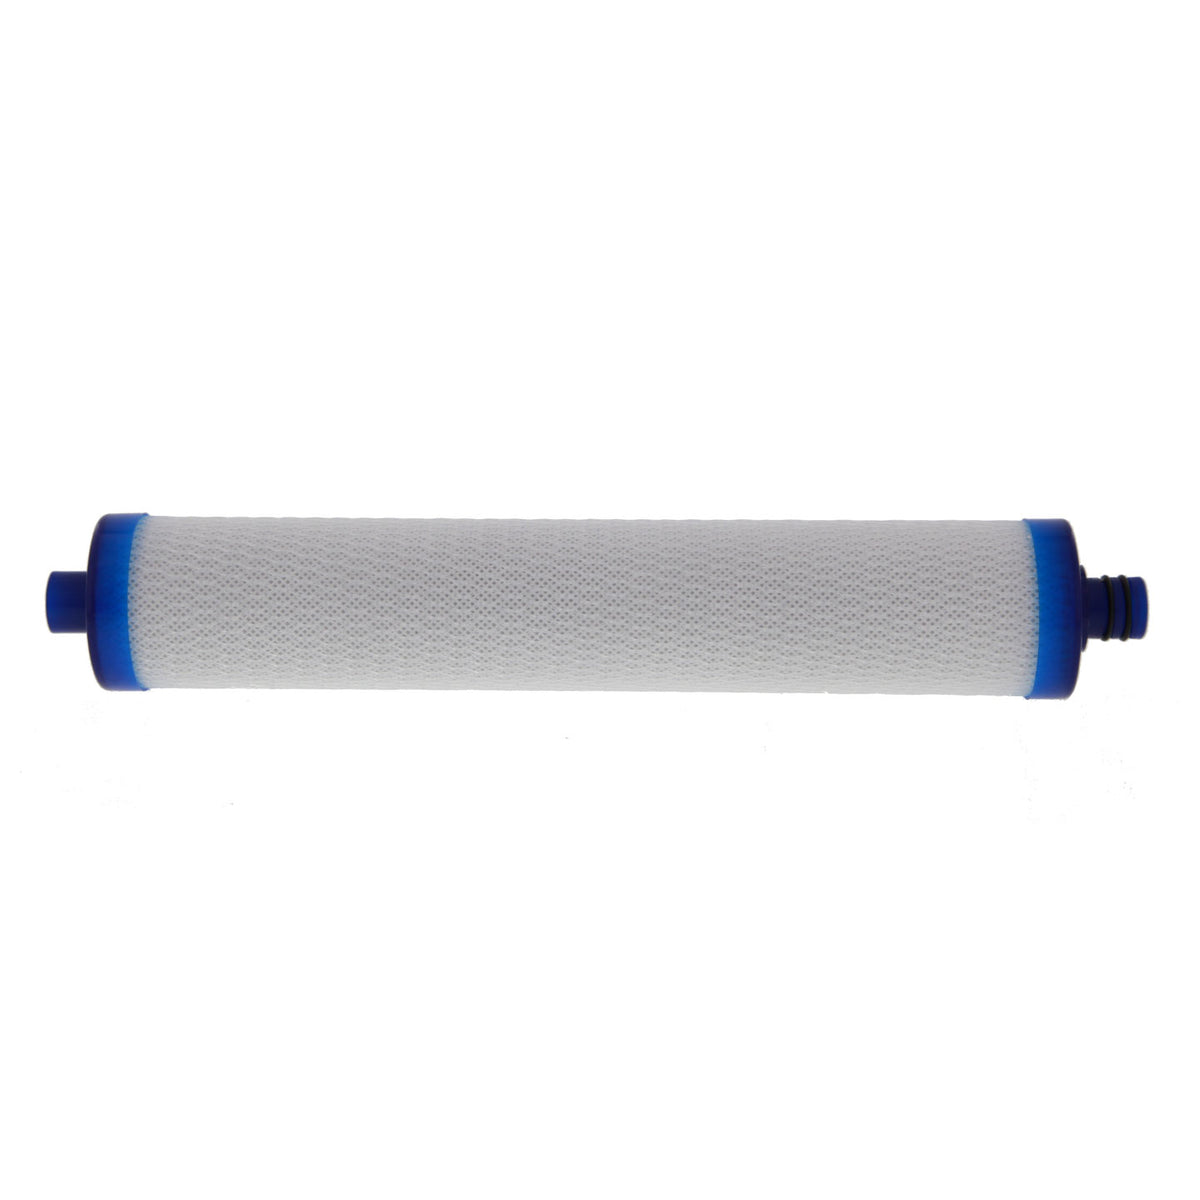 Hydrotech 41400009 S-FS-19 RO Carbon Filter